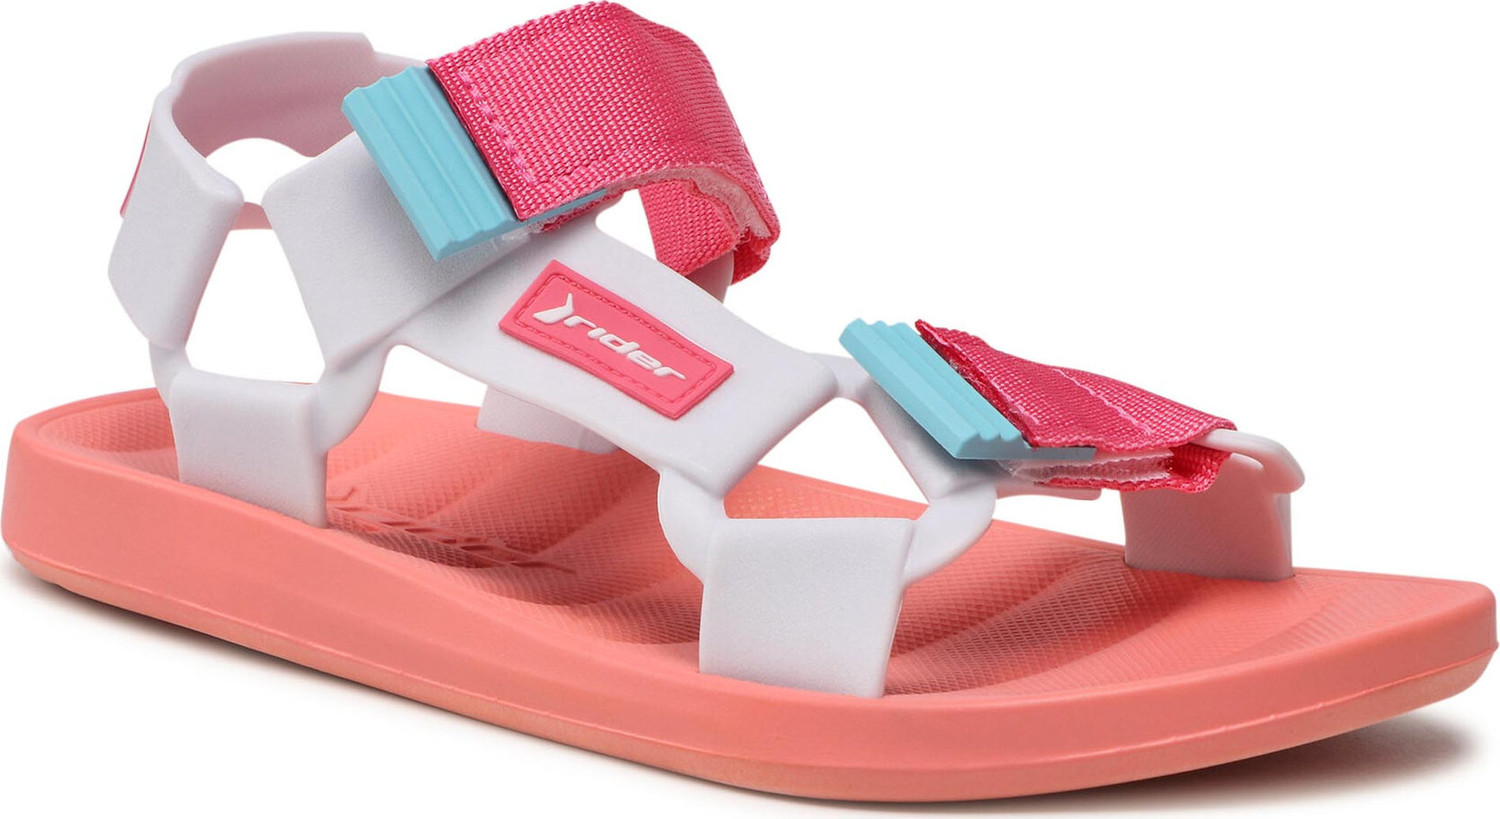 Sandály Rider Free Papete Ad 11567 Pink/White 25631